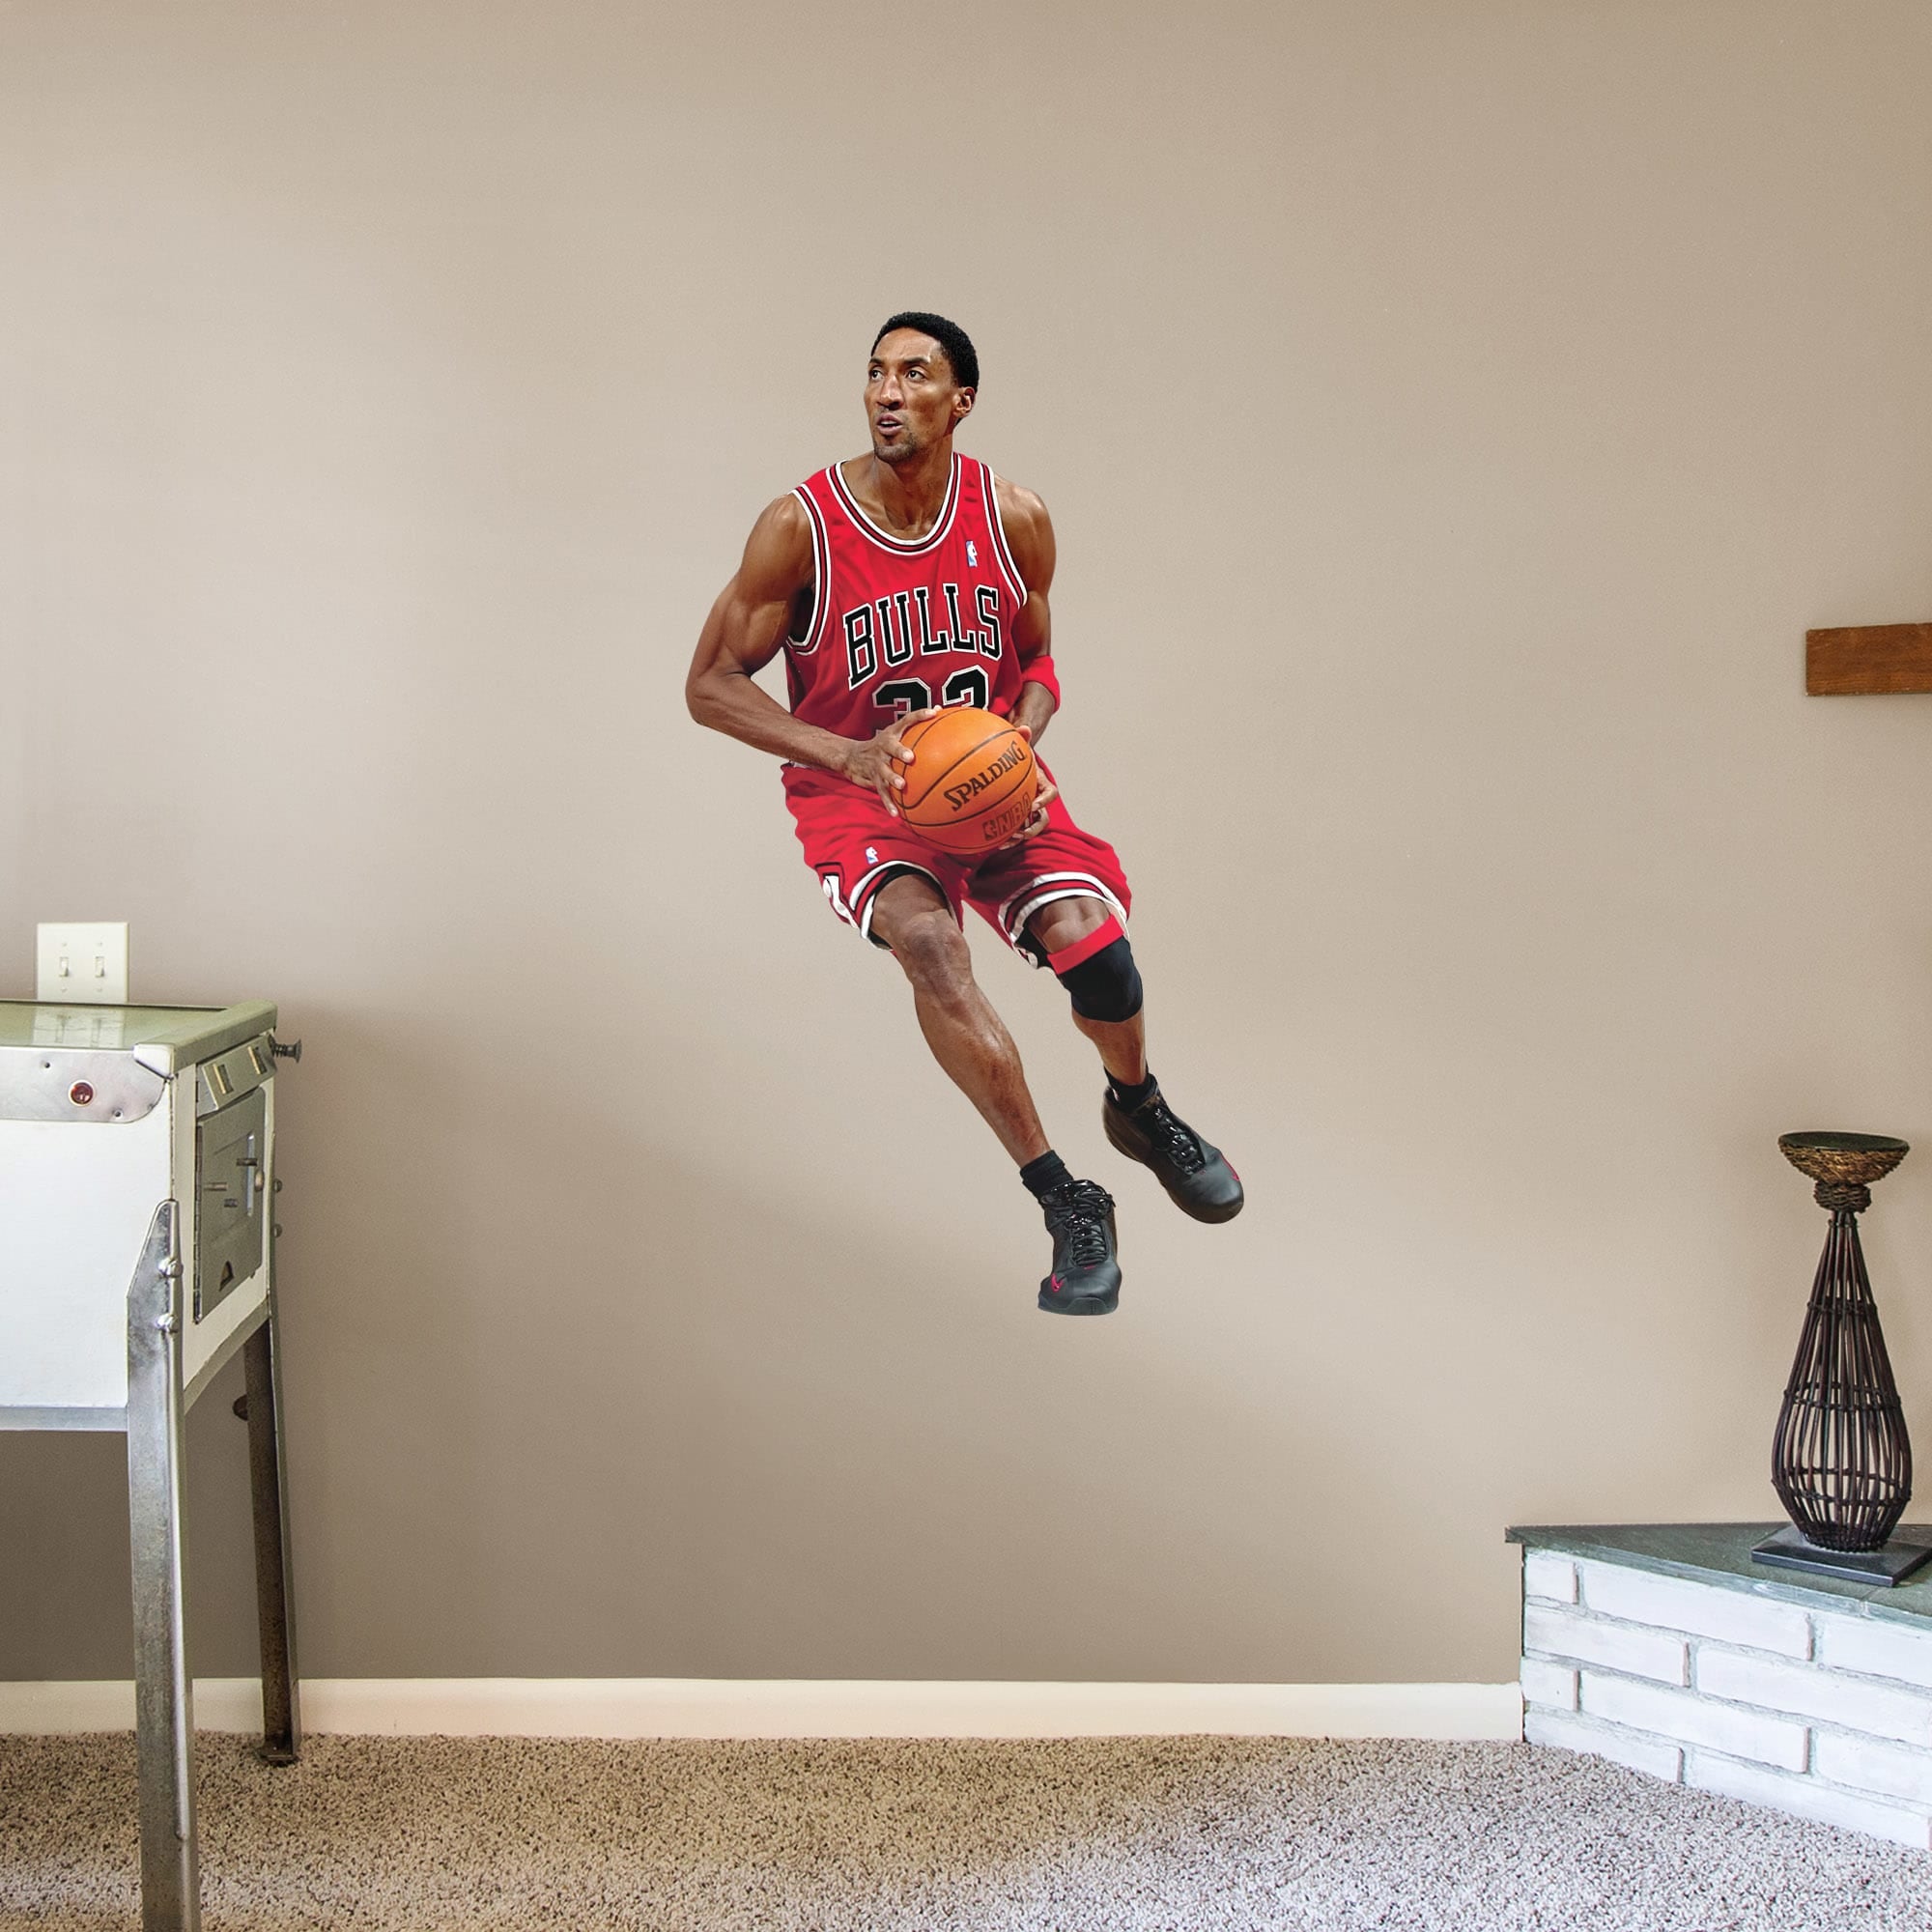 Scottie Pippen for Chicago Bulls - Officially Licensed NBA Removable Wall Decal Giant Athlete + 2 Decals (28.5"W x 51"H) by Fath